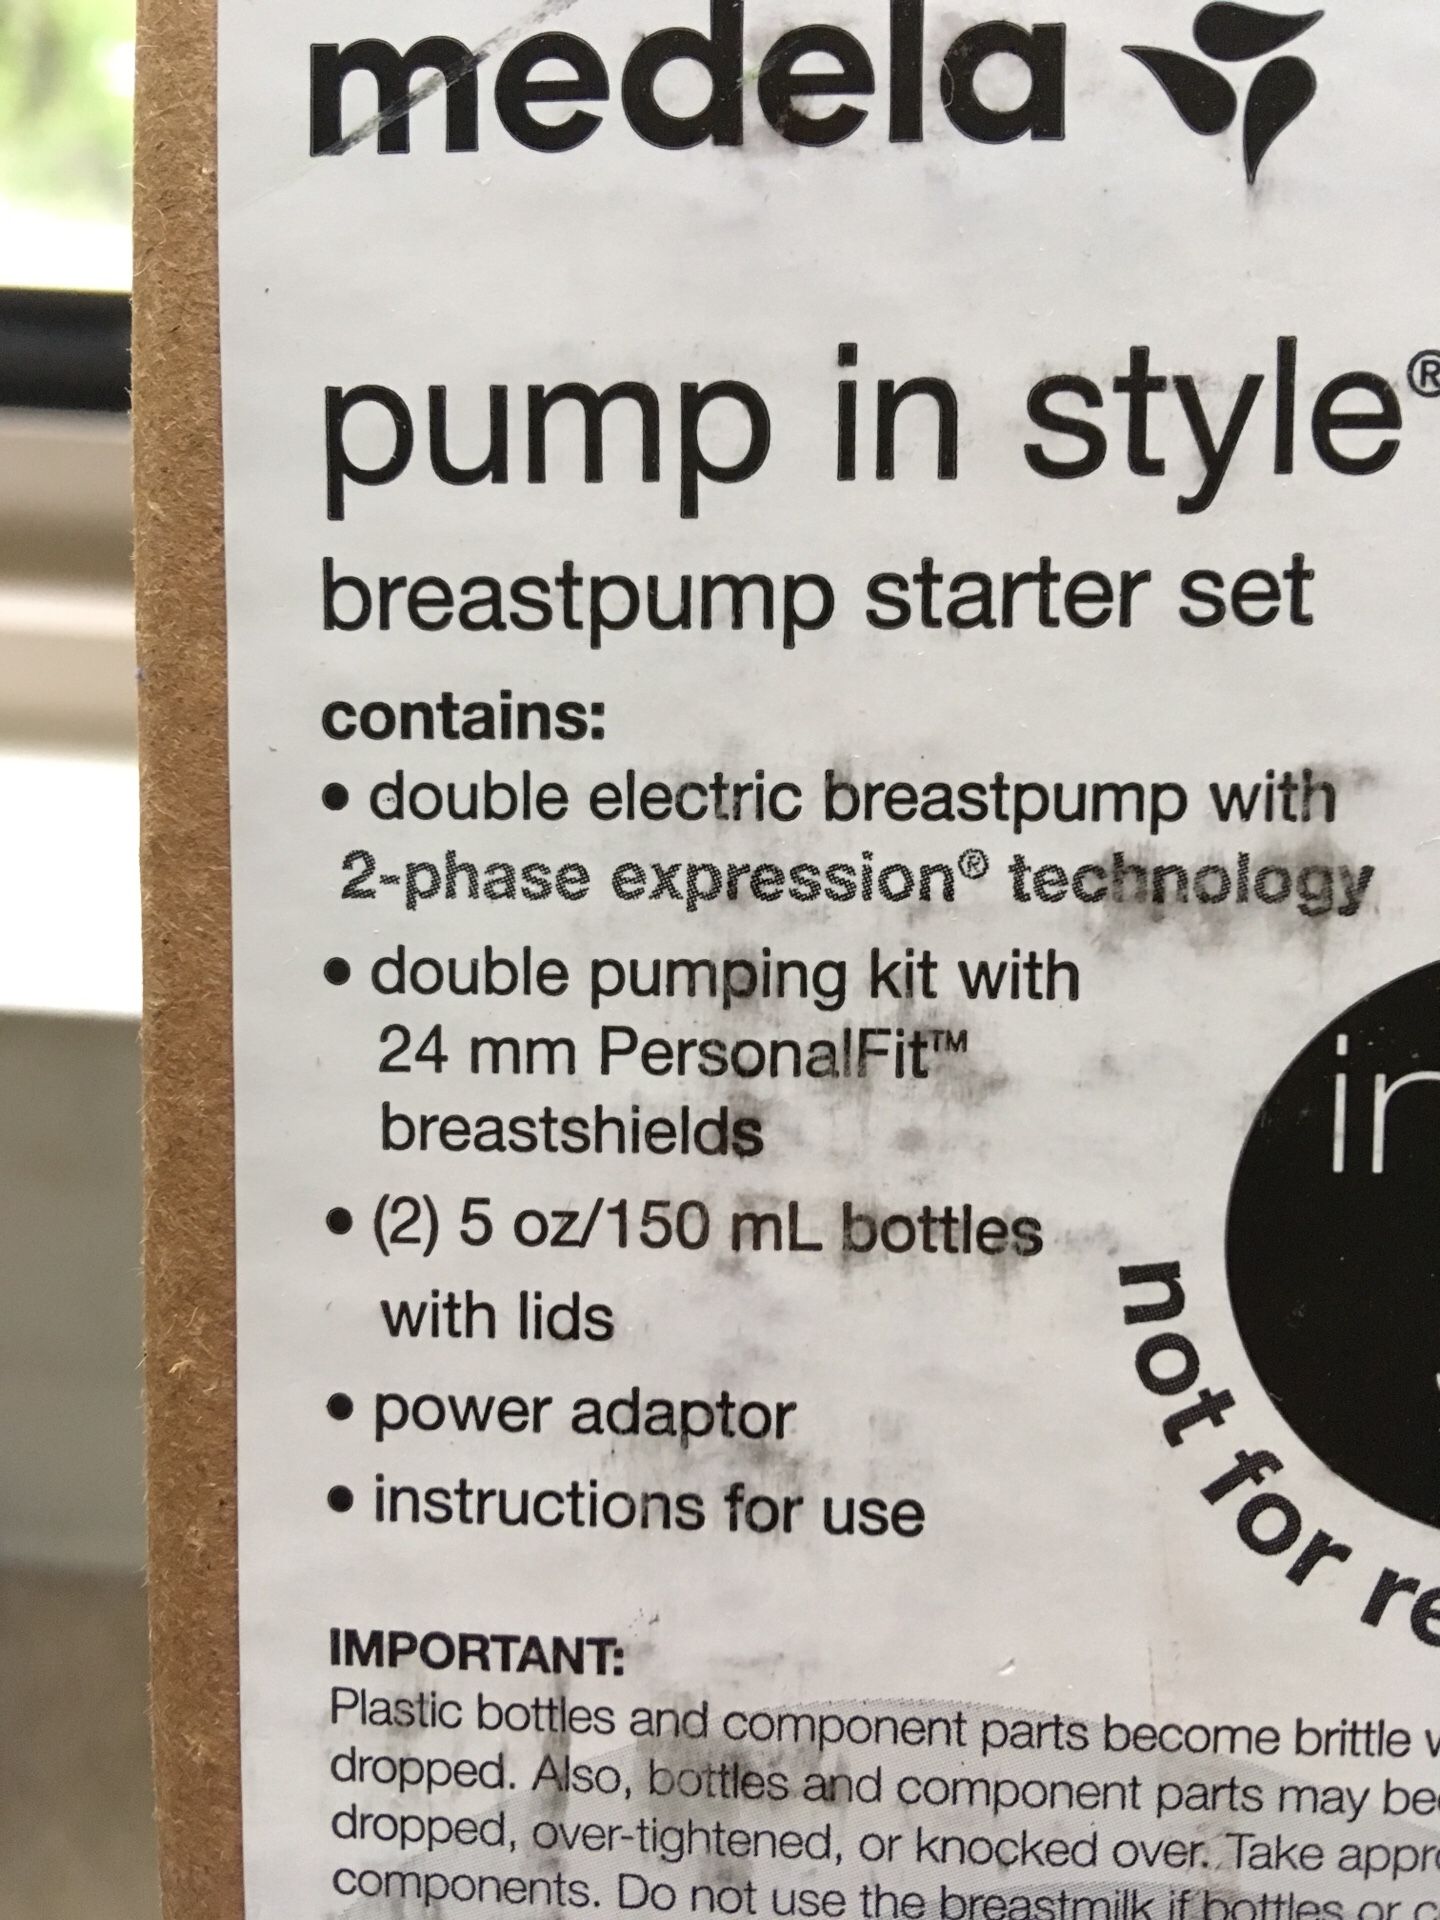 Breast pump not used at all